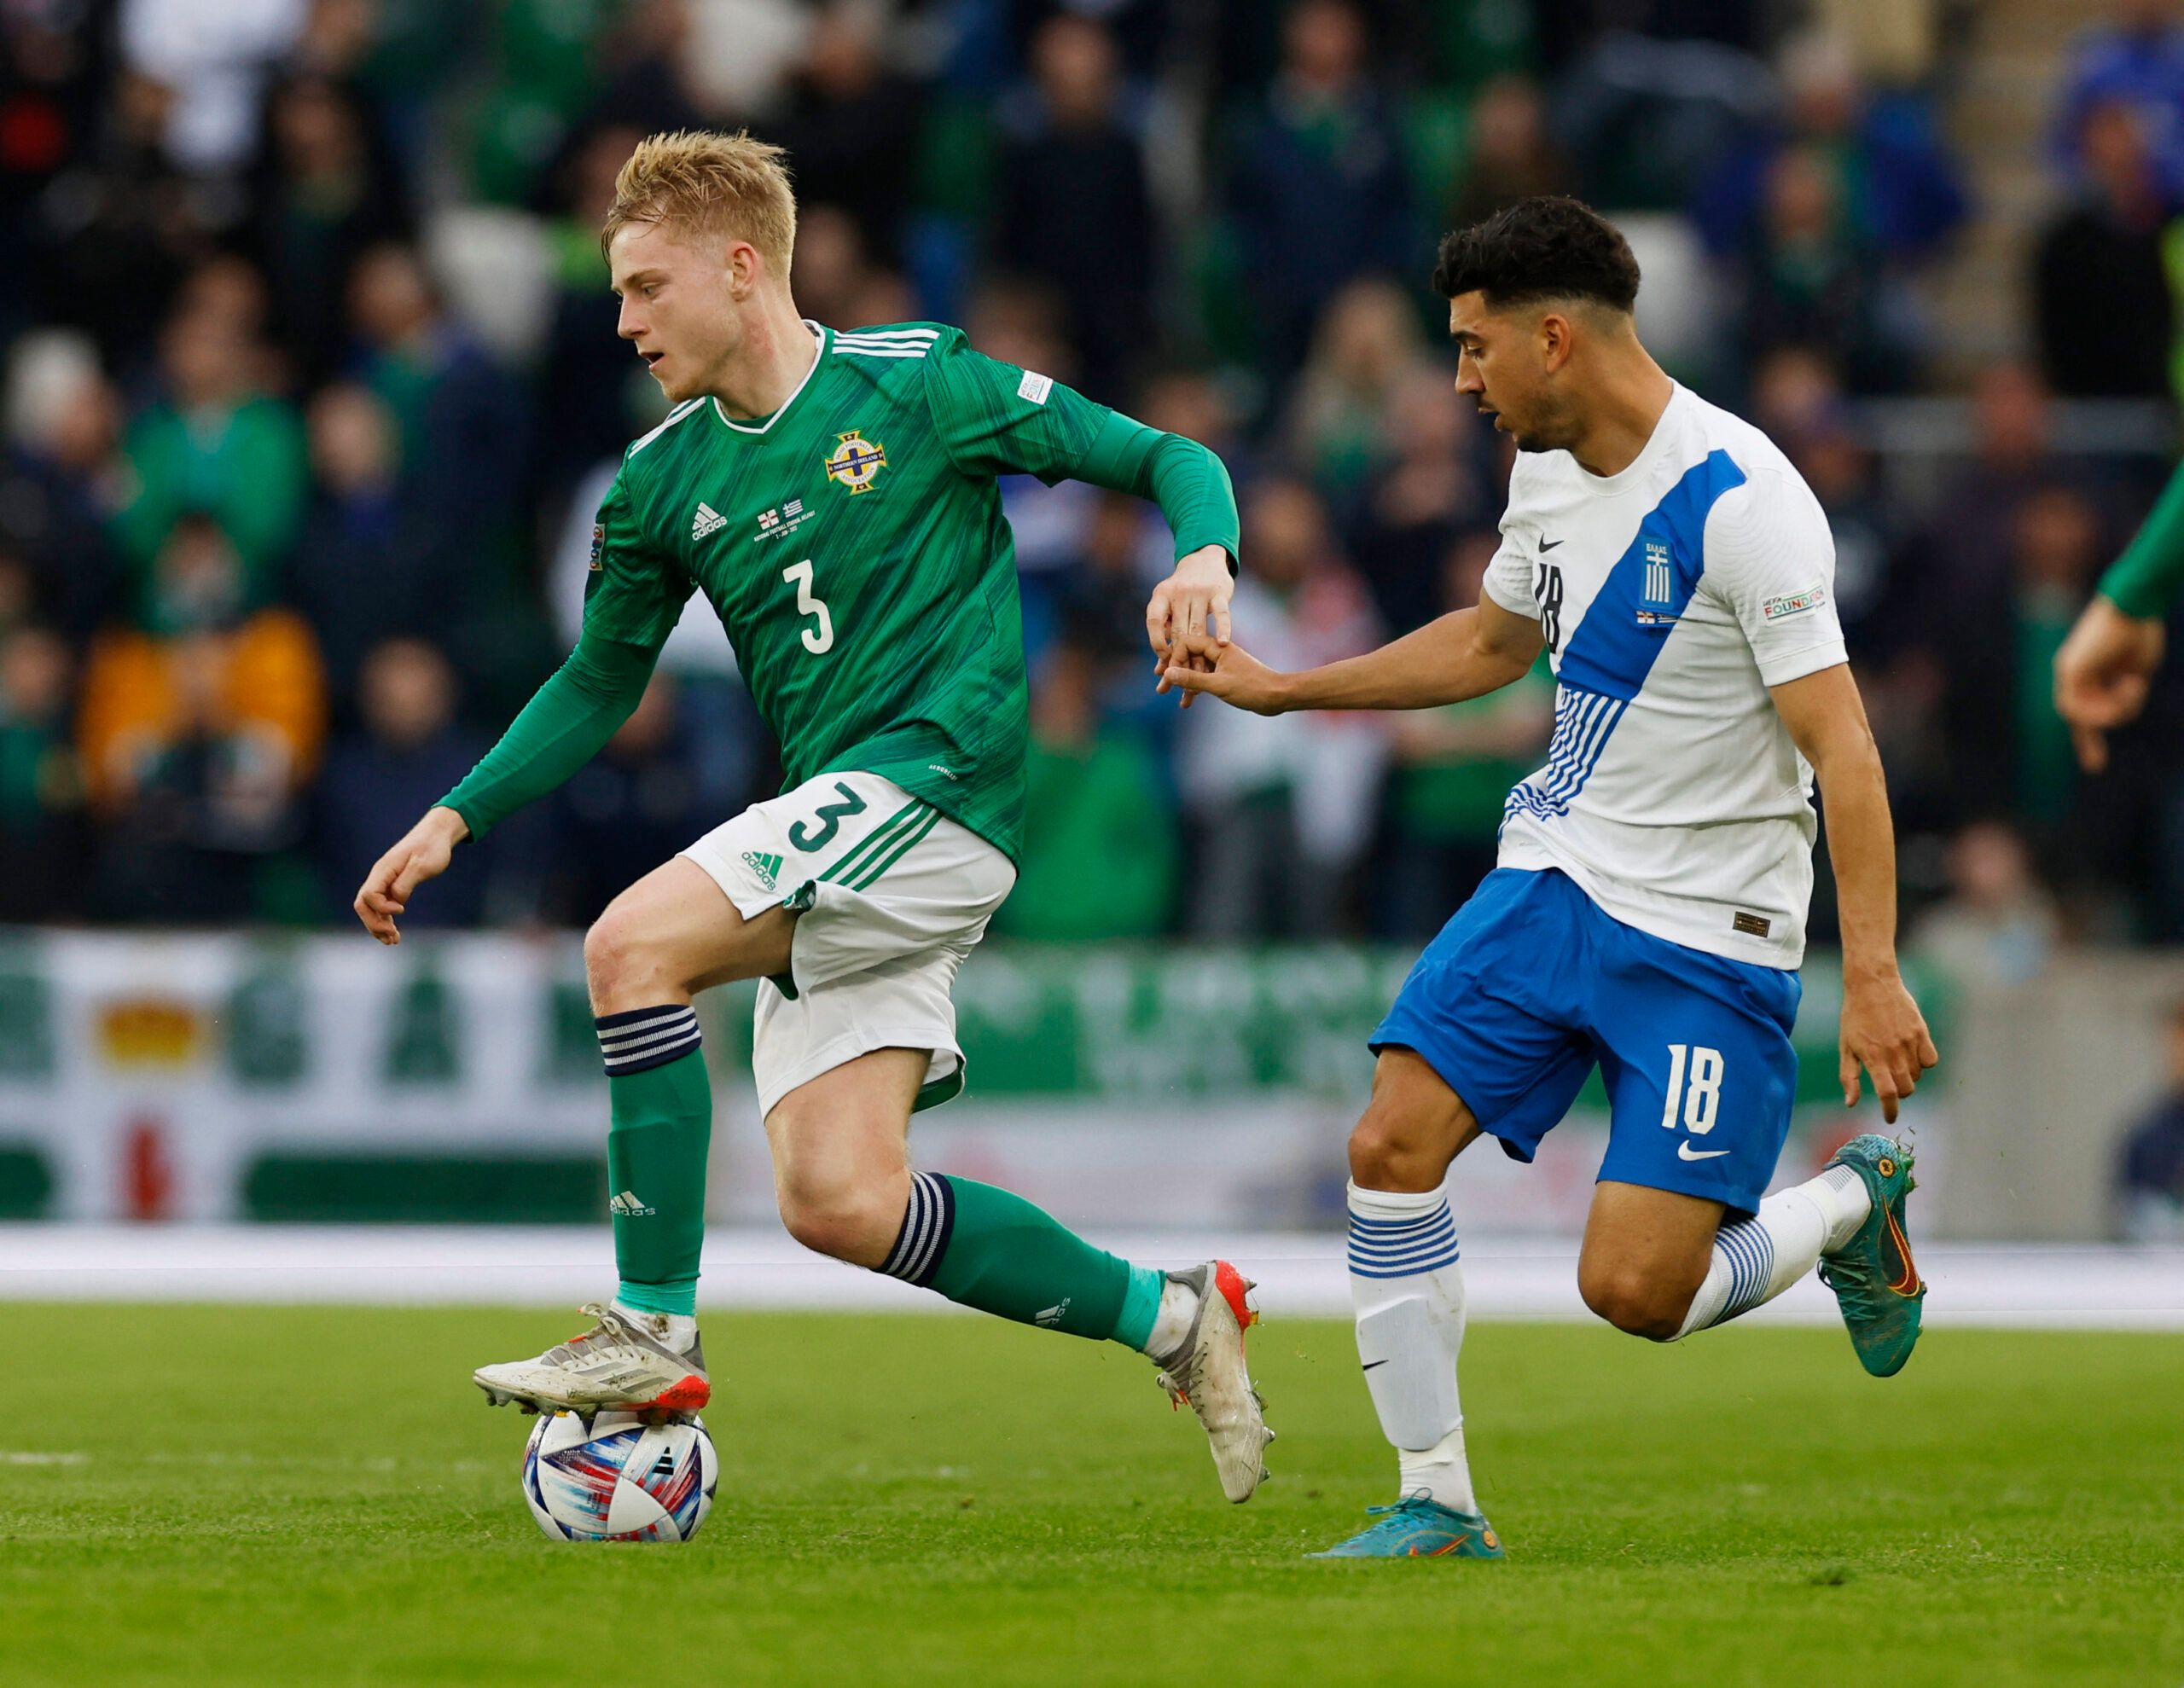 Soccer Football - UEFA Nations League - Group J - Northern Ireland v Greece - Windsor Park, Belfast, Northern Ireland, Britain - June 2, 2022 Northern Ireland's Paddy Lane in action with Greece's Dimitrios Limnios Action Images via Reuters/Jason Cairnduff